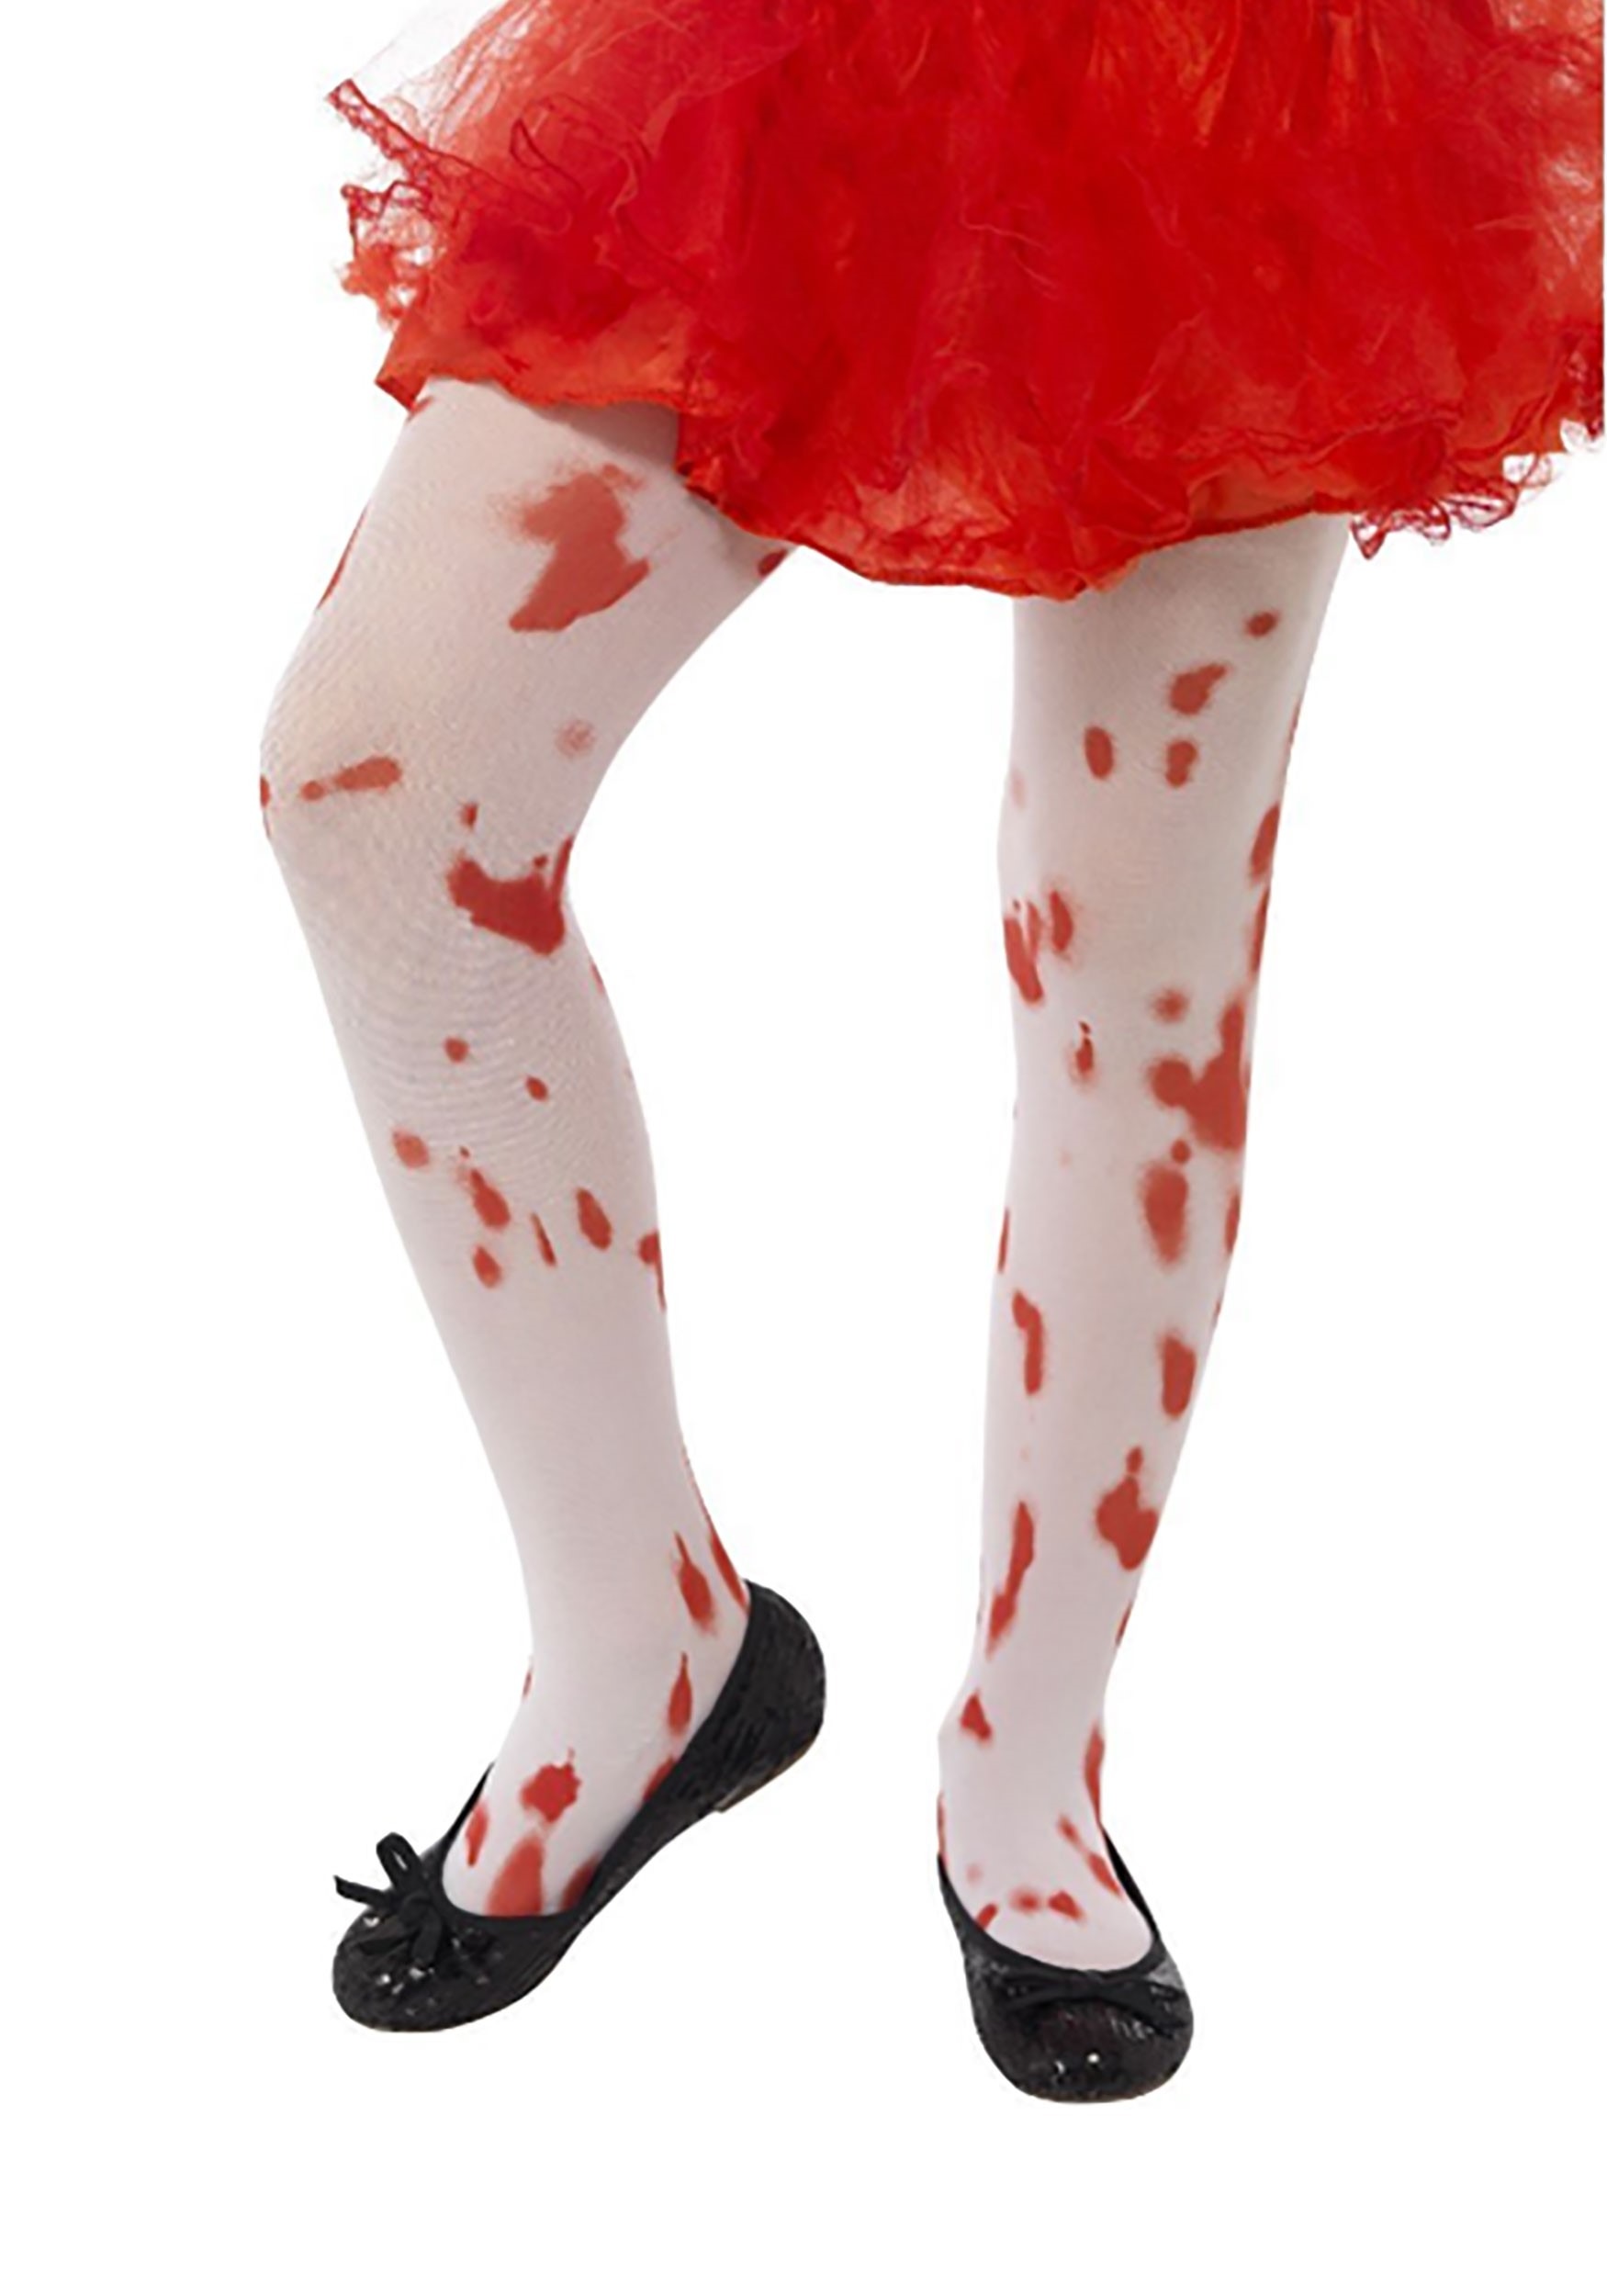 Adult Womens Bloody Leggings Stockings Red White Blood Costume Accessory 